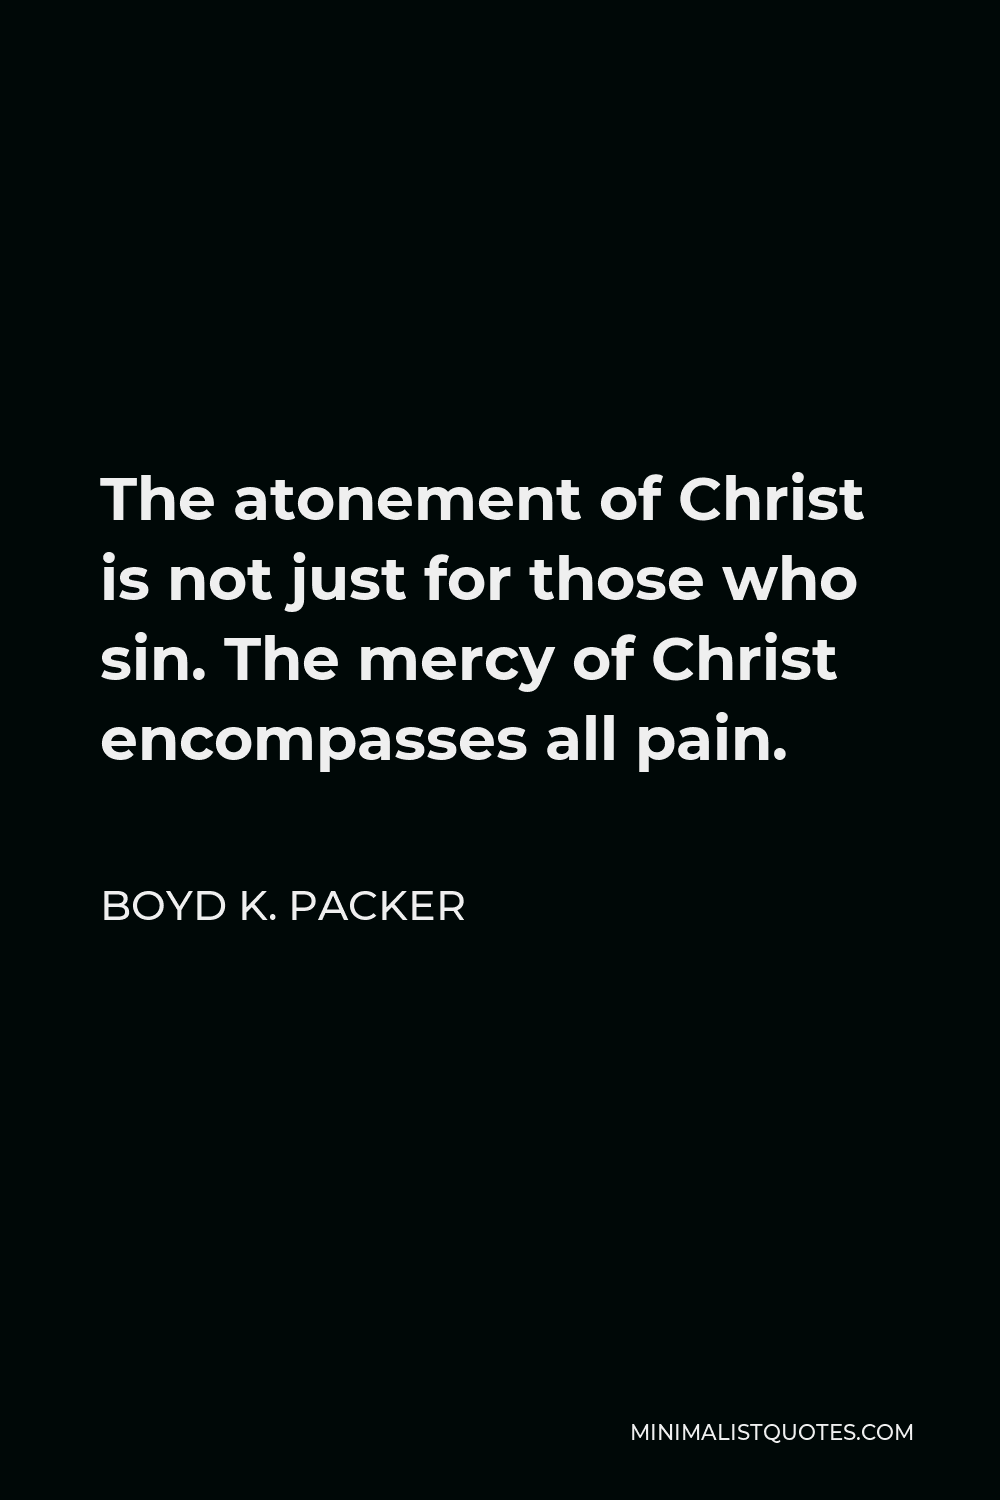 Boyd K. Packer Quote - The atonement of Christ is not just for those who sin. The mercy of Christ encompasses all pain.